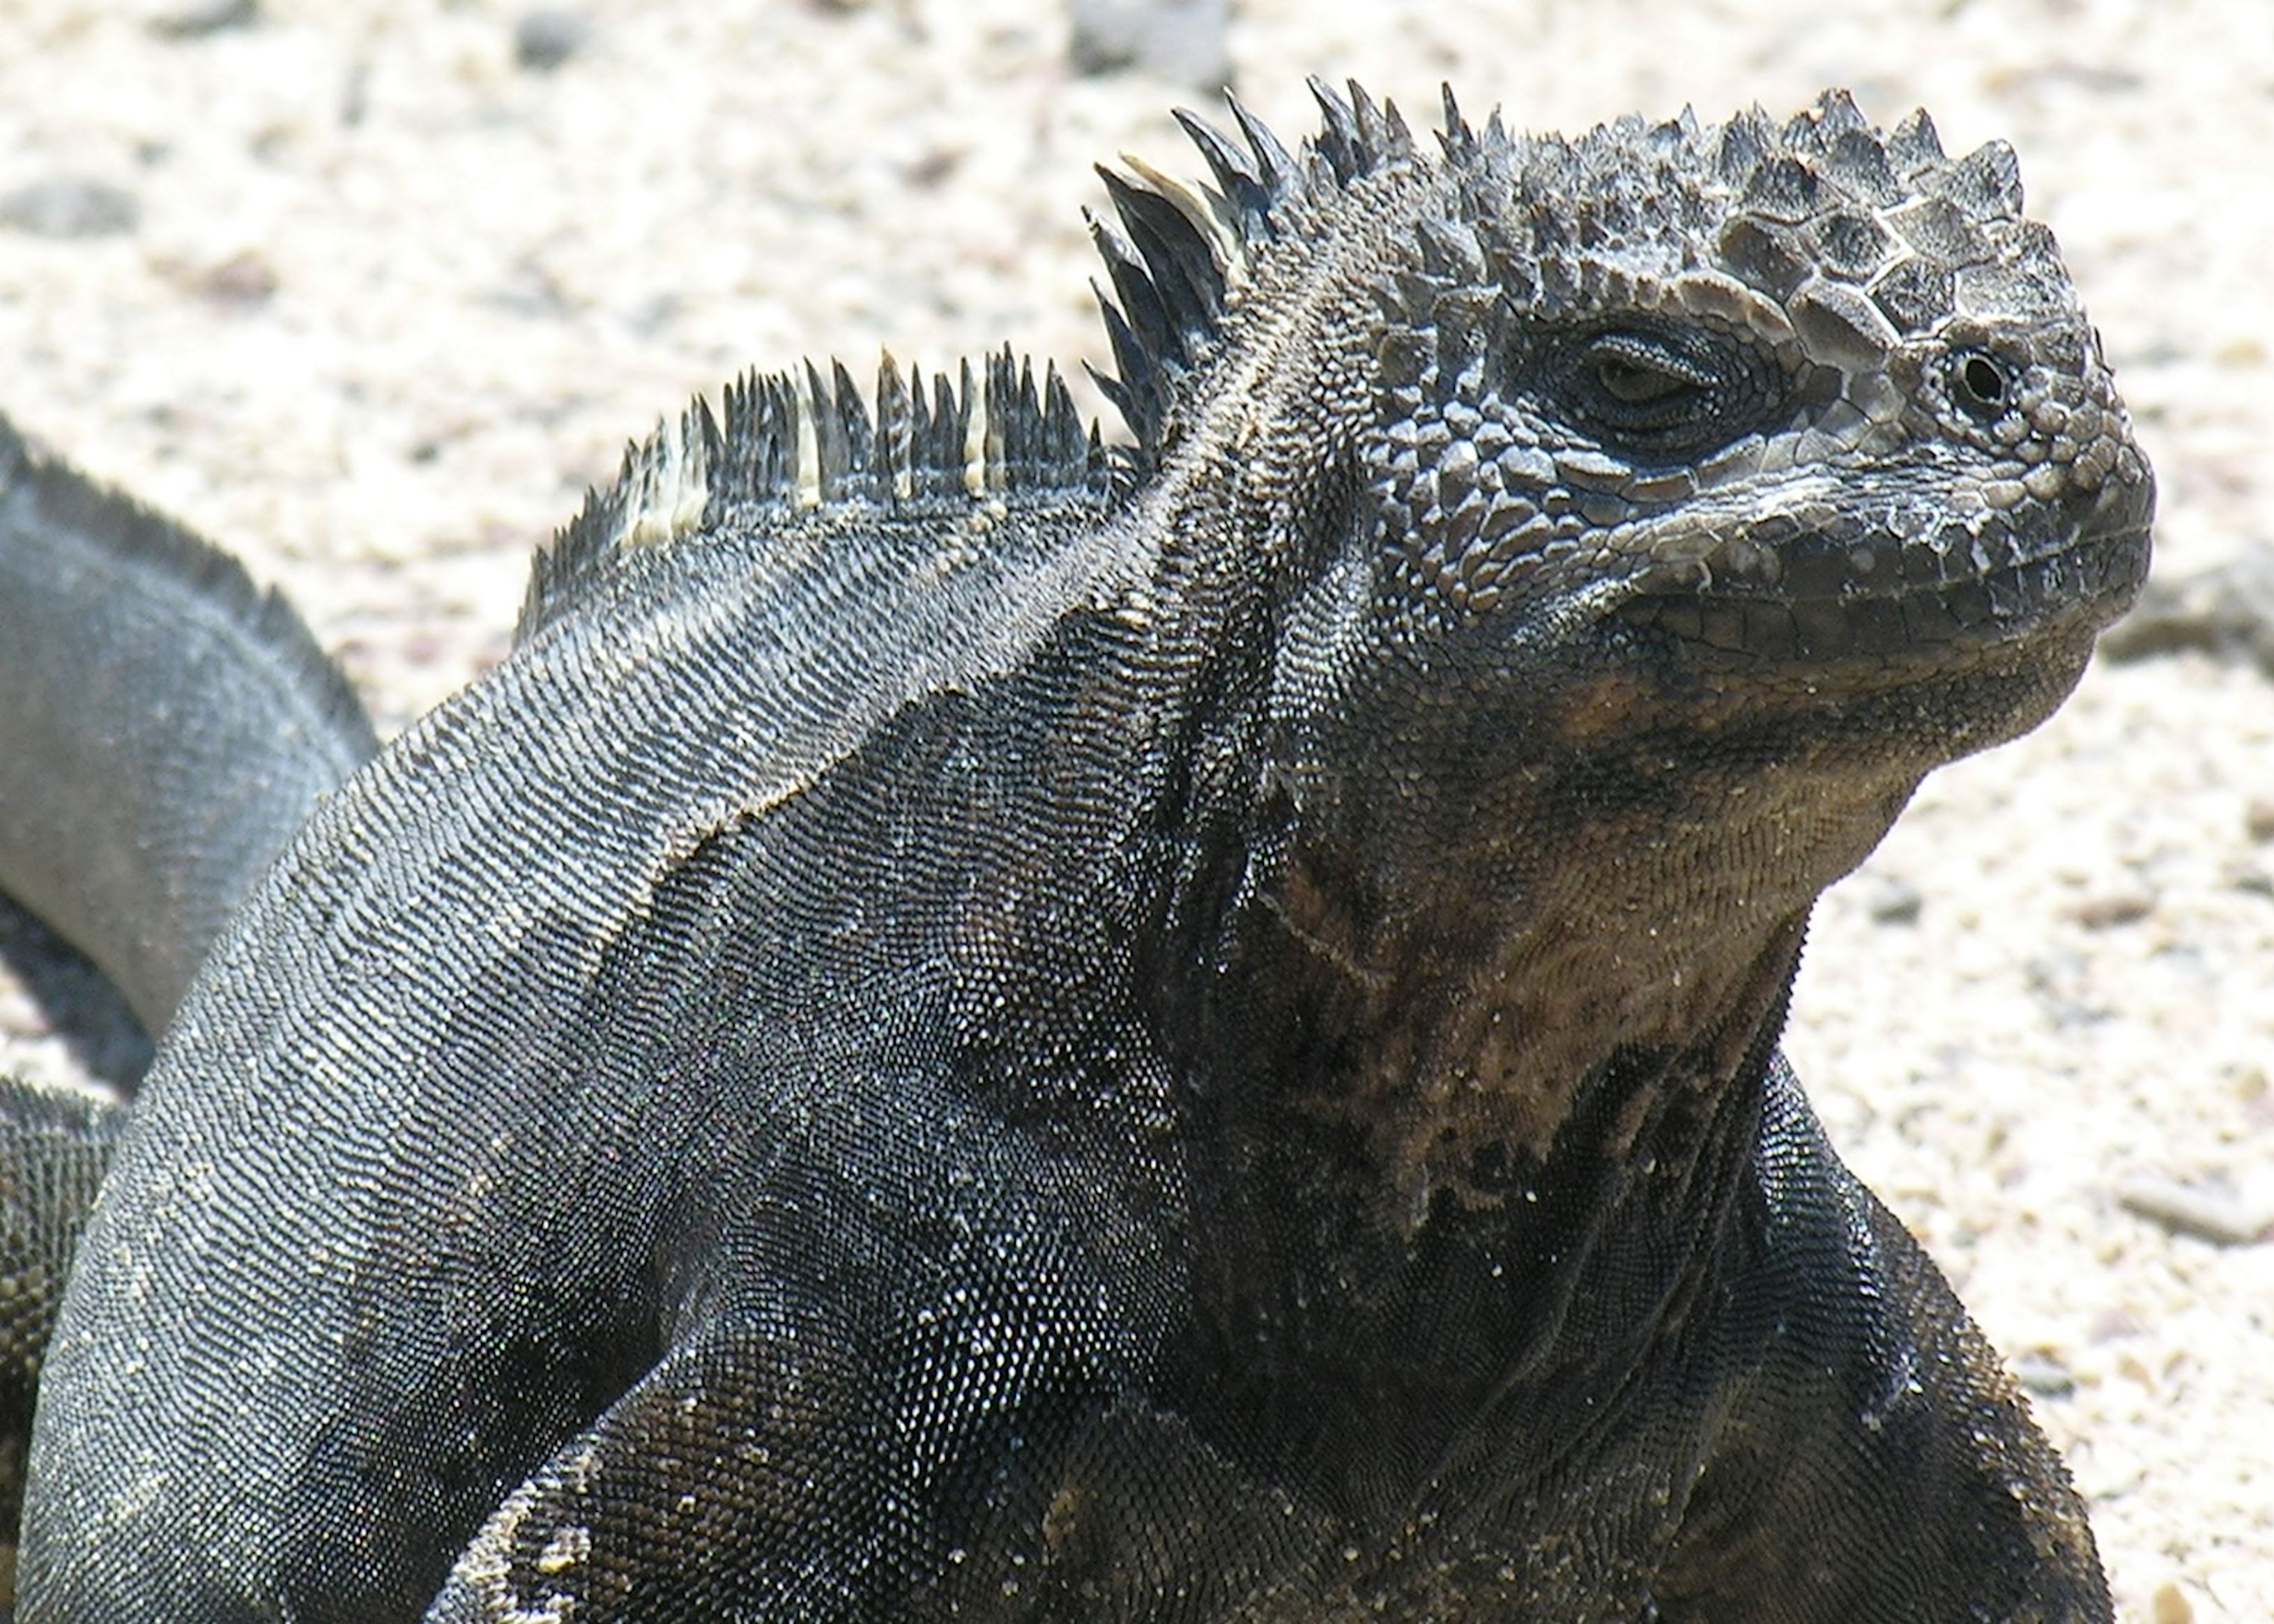 Galapagos Islands wildlife | Travel guide | Audley Travel